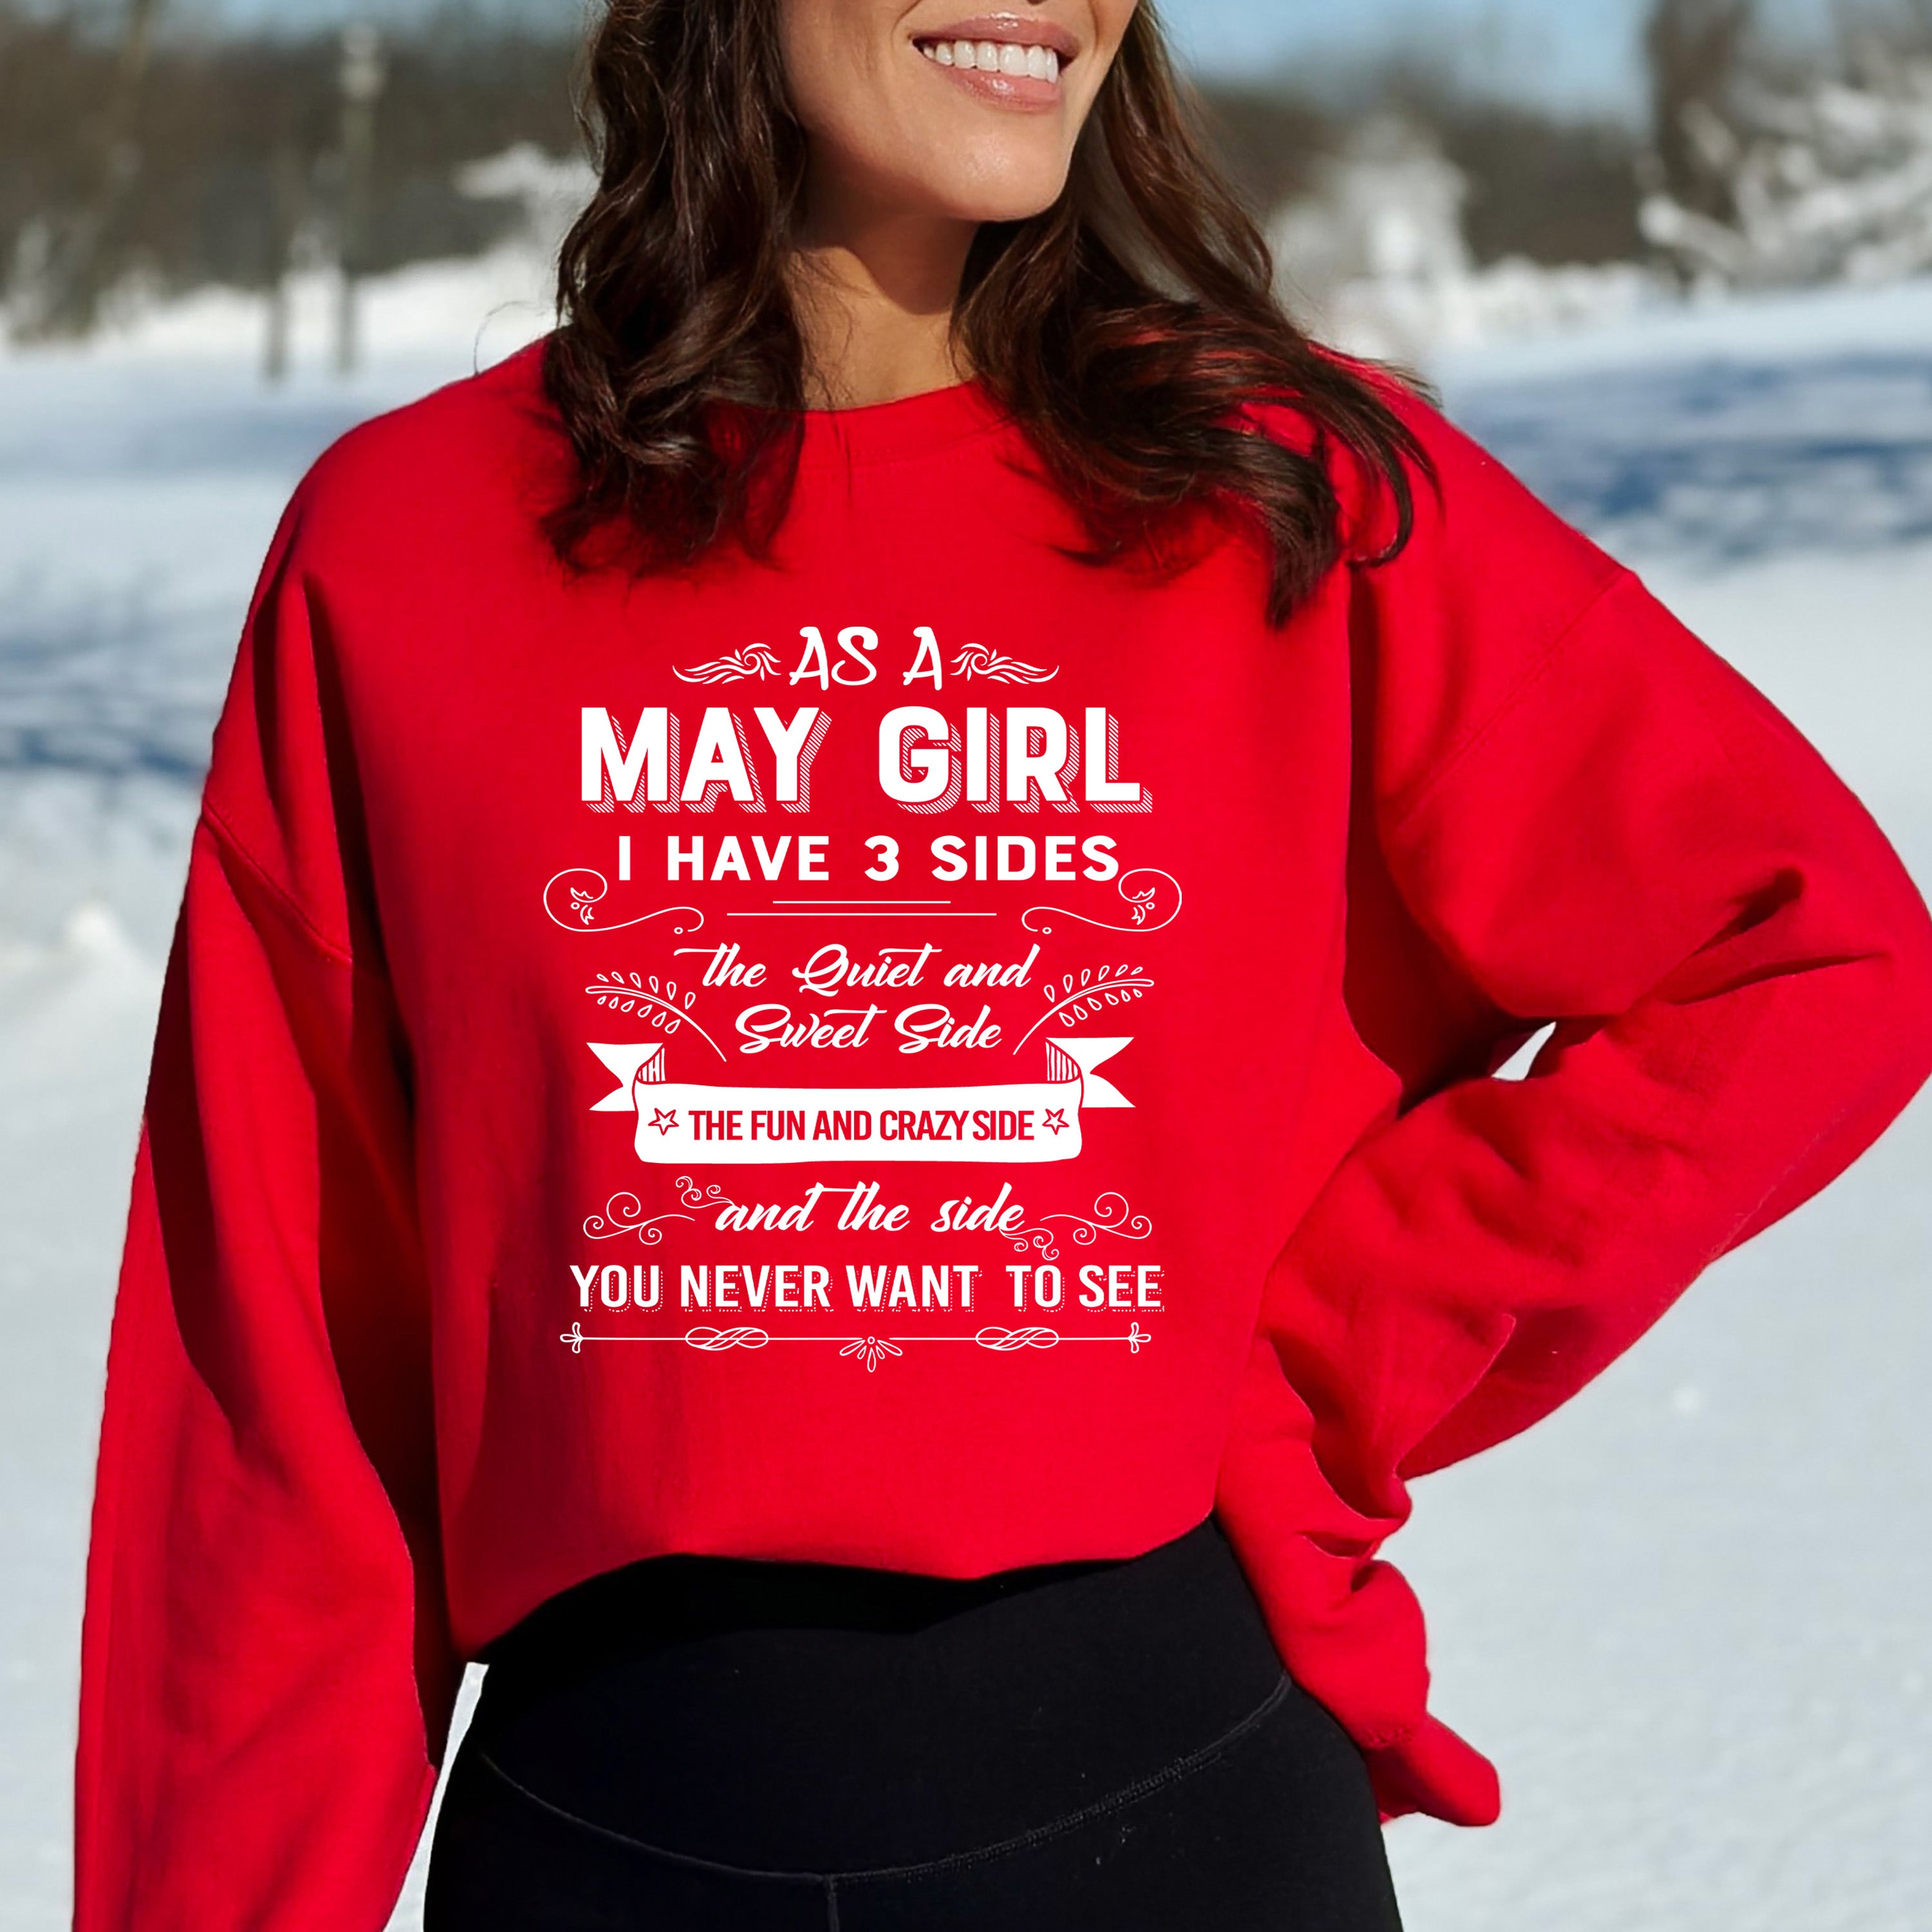 As A May Girl I Have 3 Sides - Sweatshirt & Hoodie